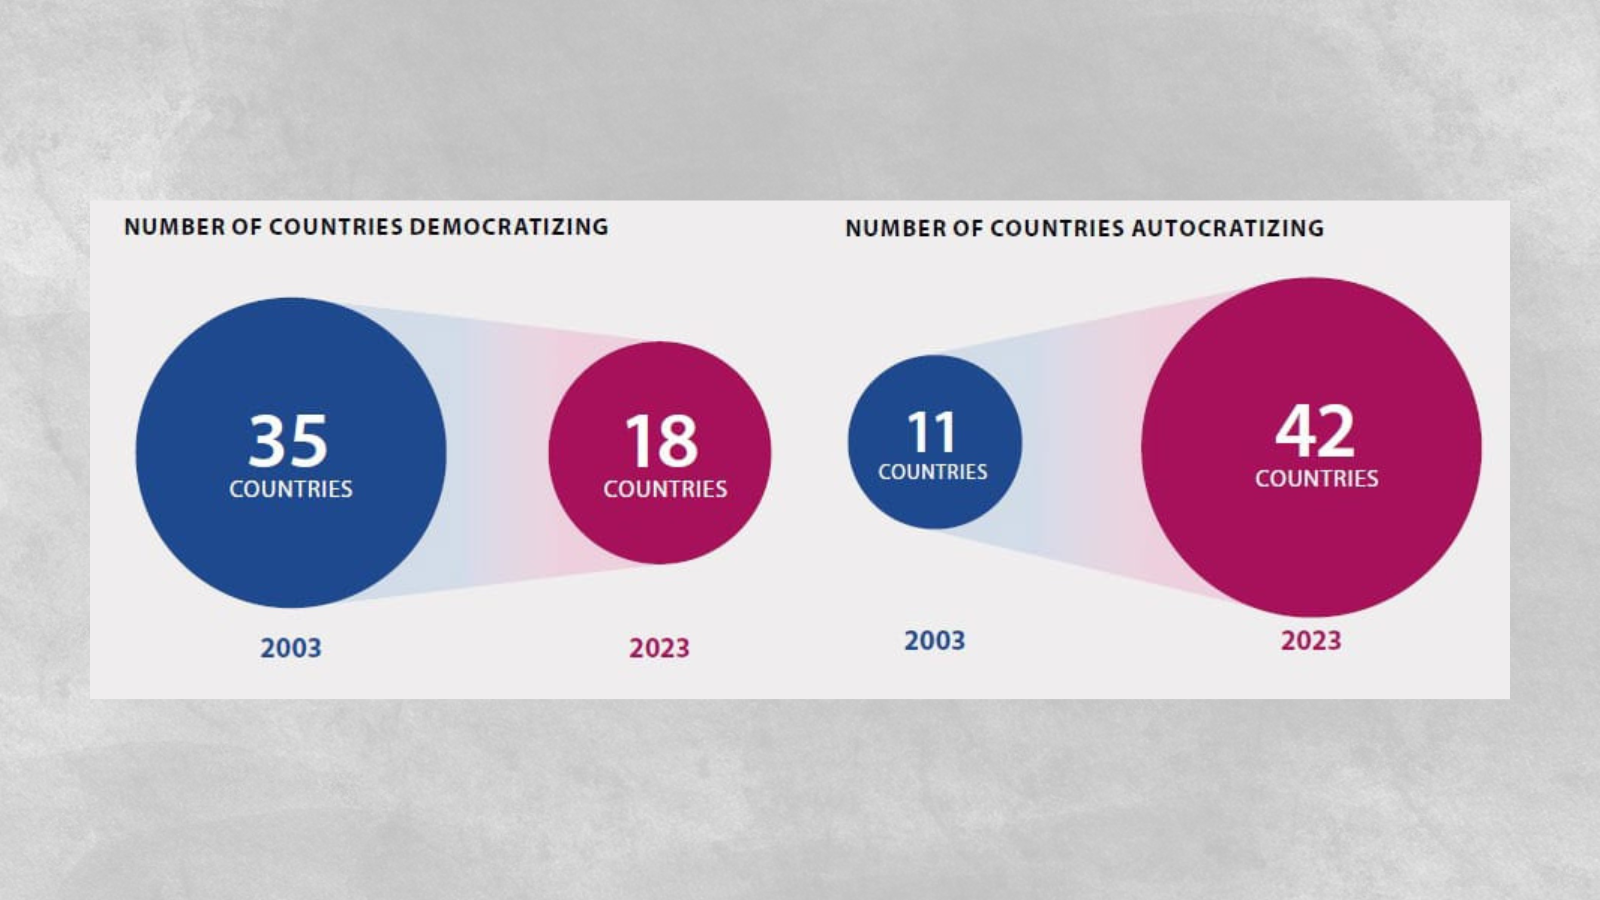 Image from V-Dem 2024 Update showing levels of autocratization and democratization among countries